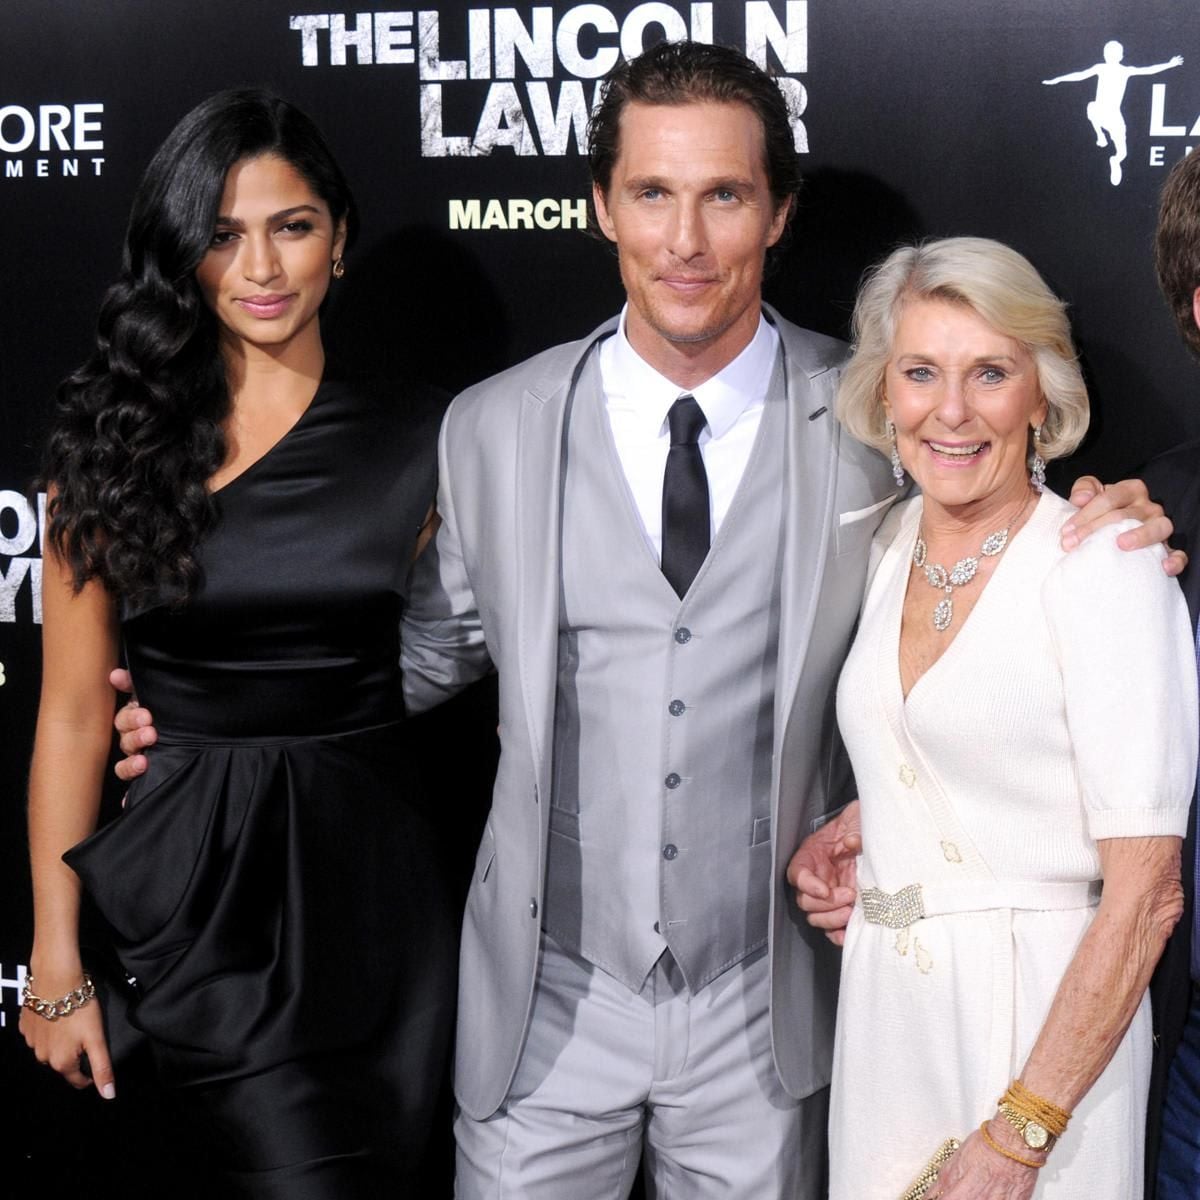 "The Lincoln Lawyer" Los Angeles Premiere